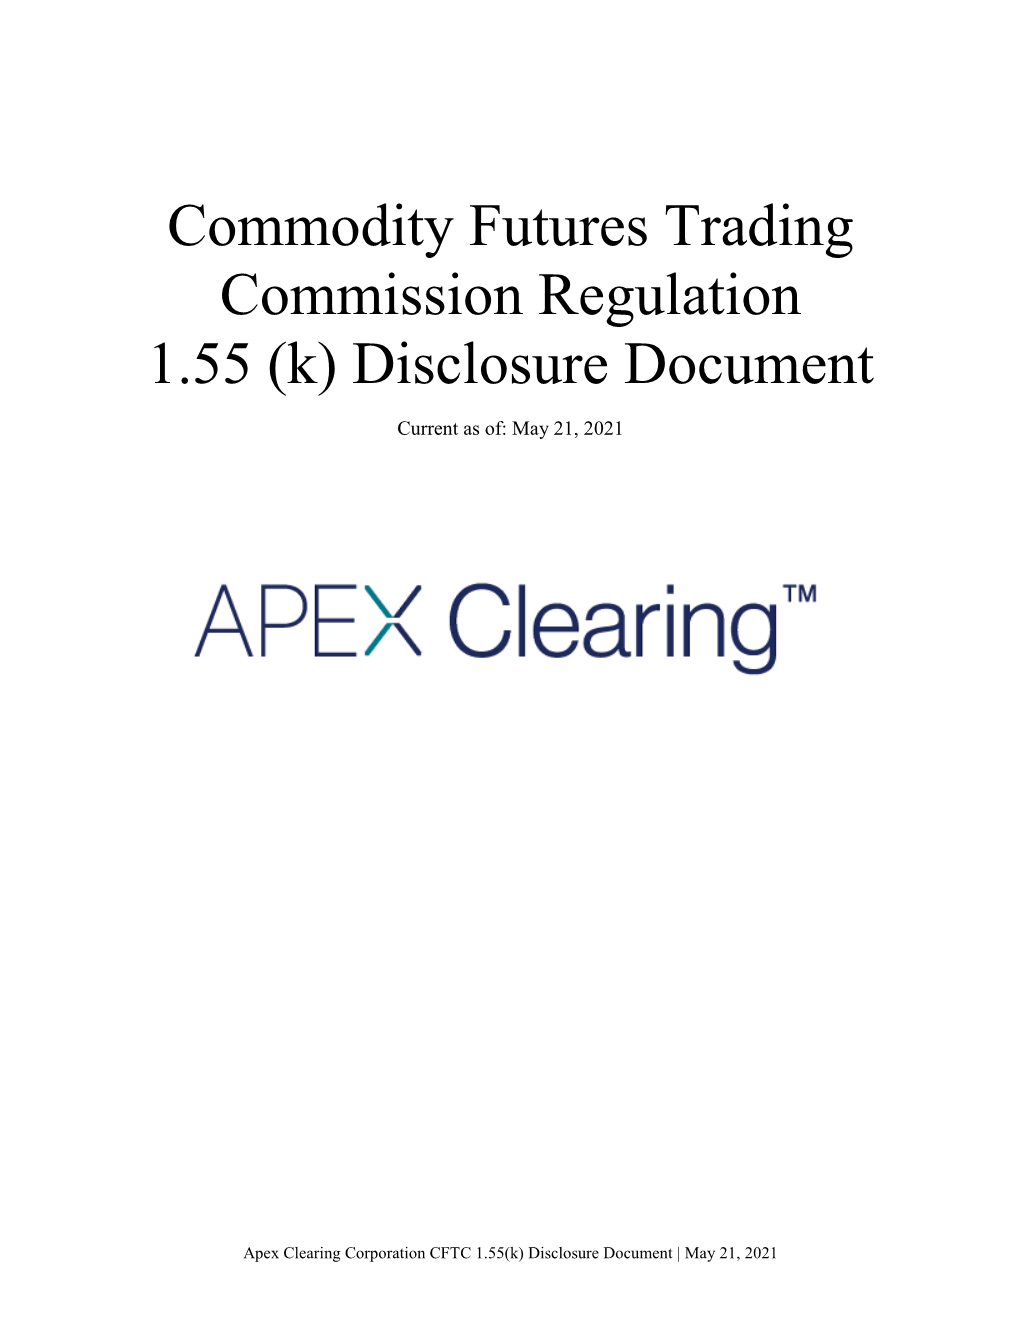 Commodity Futures Trading Commission Regulation 1.55 (K) Disclosure Document